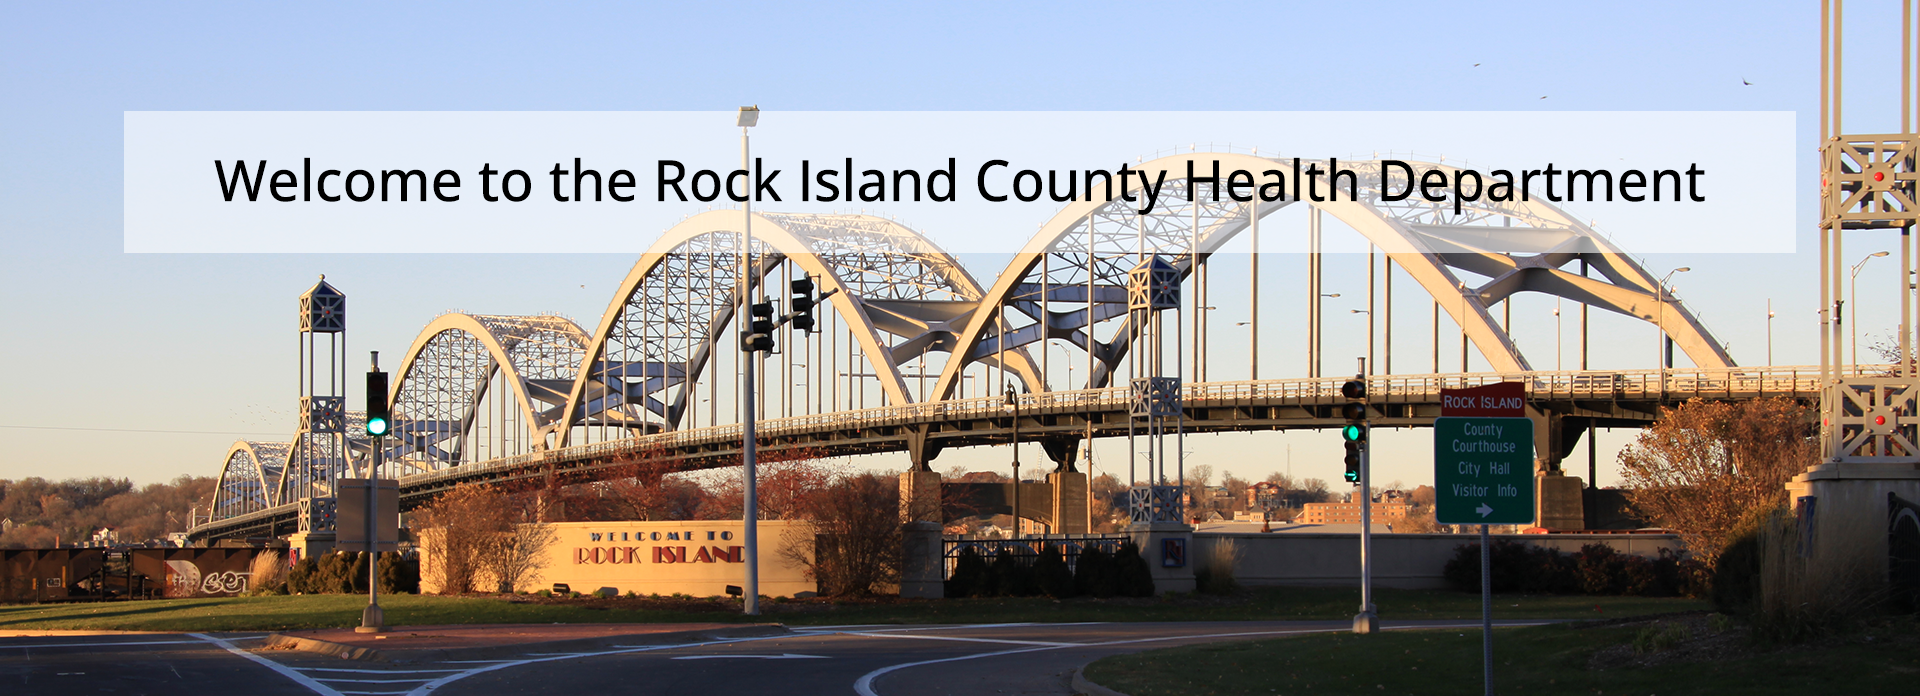 Photo of the Centennial Bridge with a Welcome to Rock Island sign in the foreground and a text overlay that says Welcome to the Rock Island Health Department